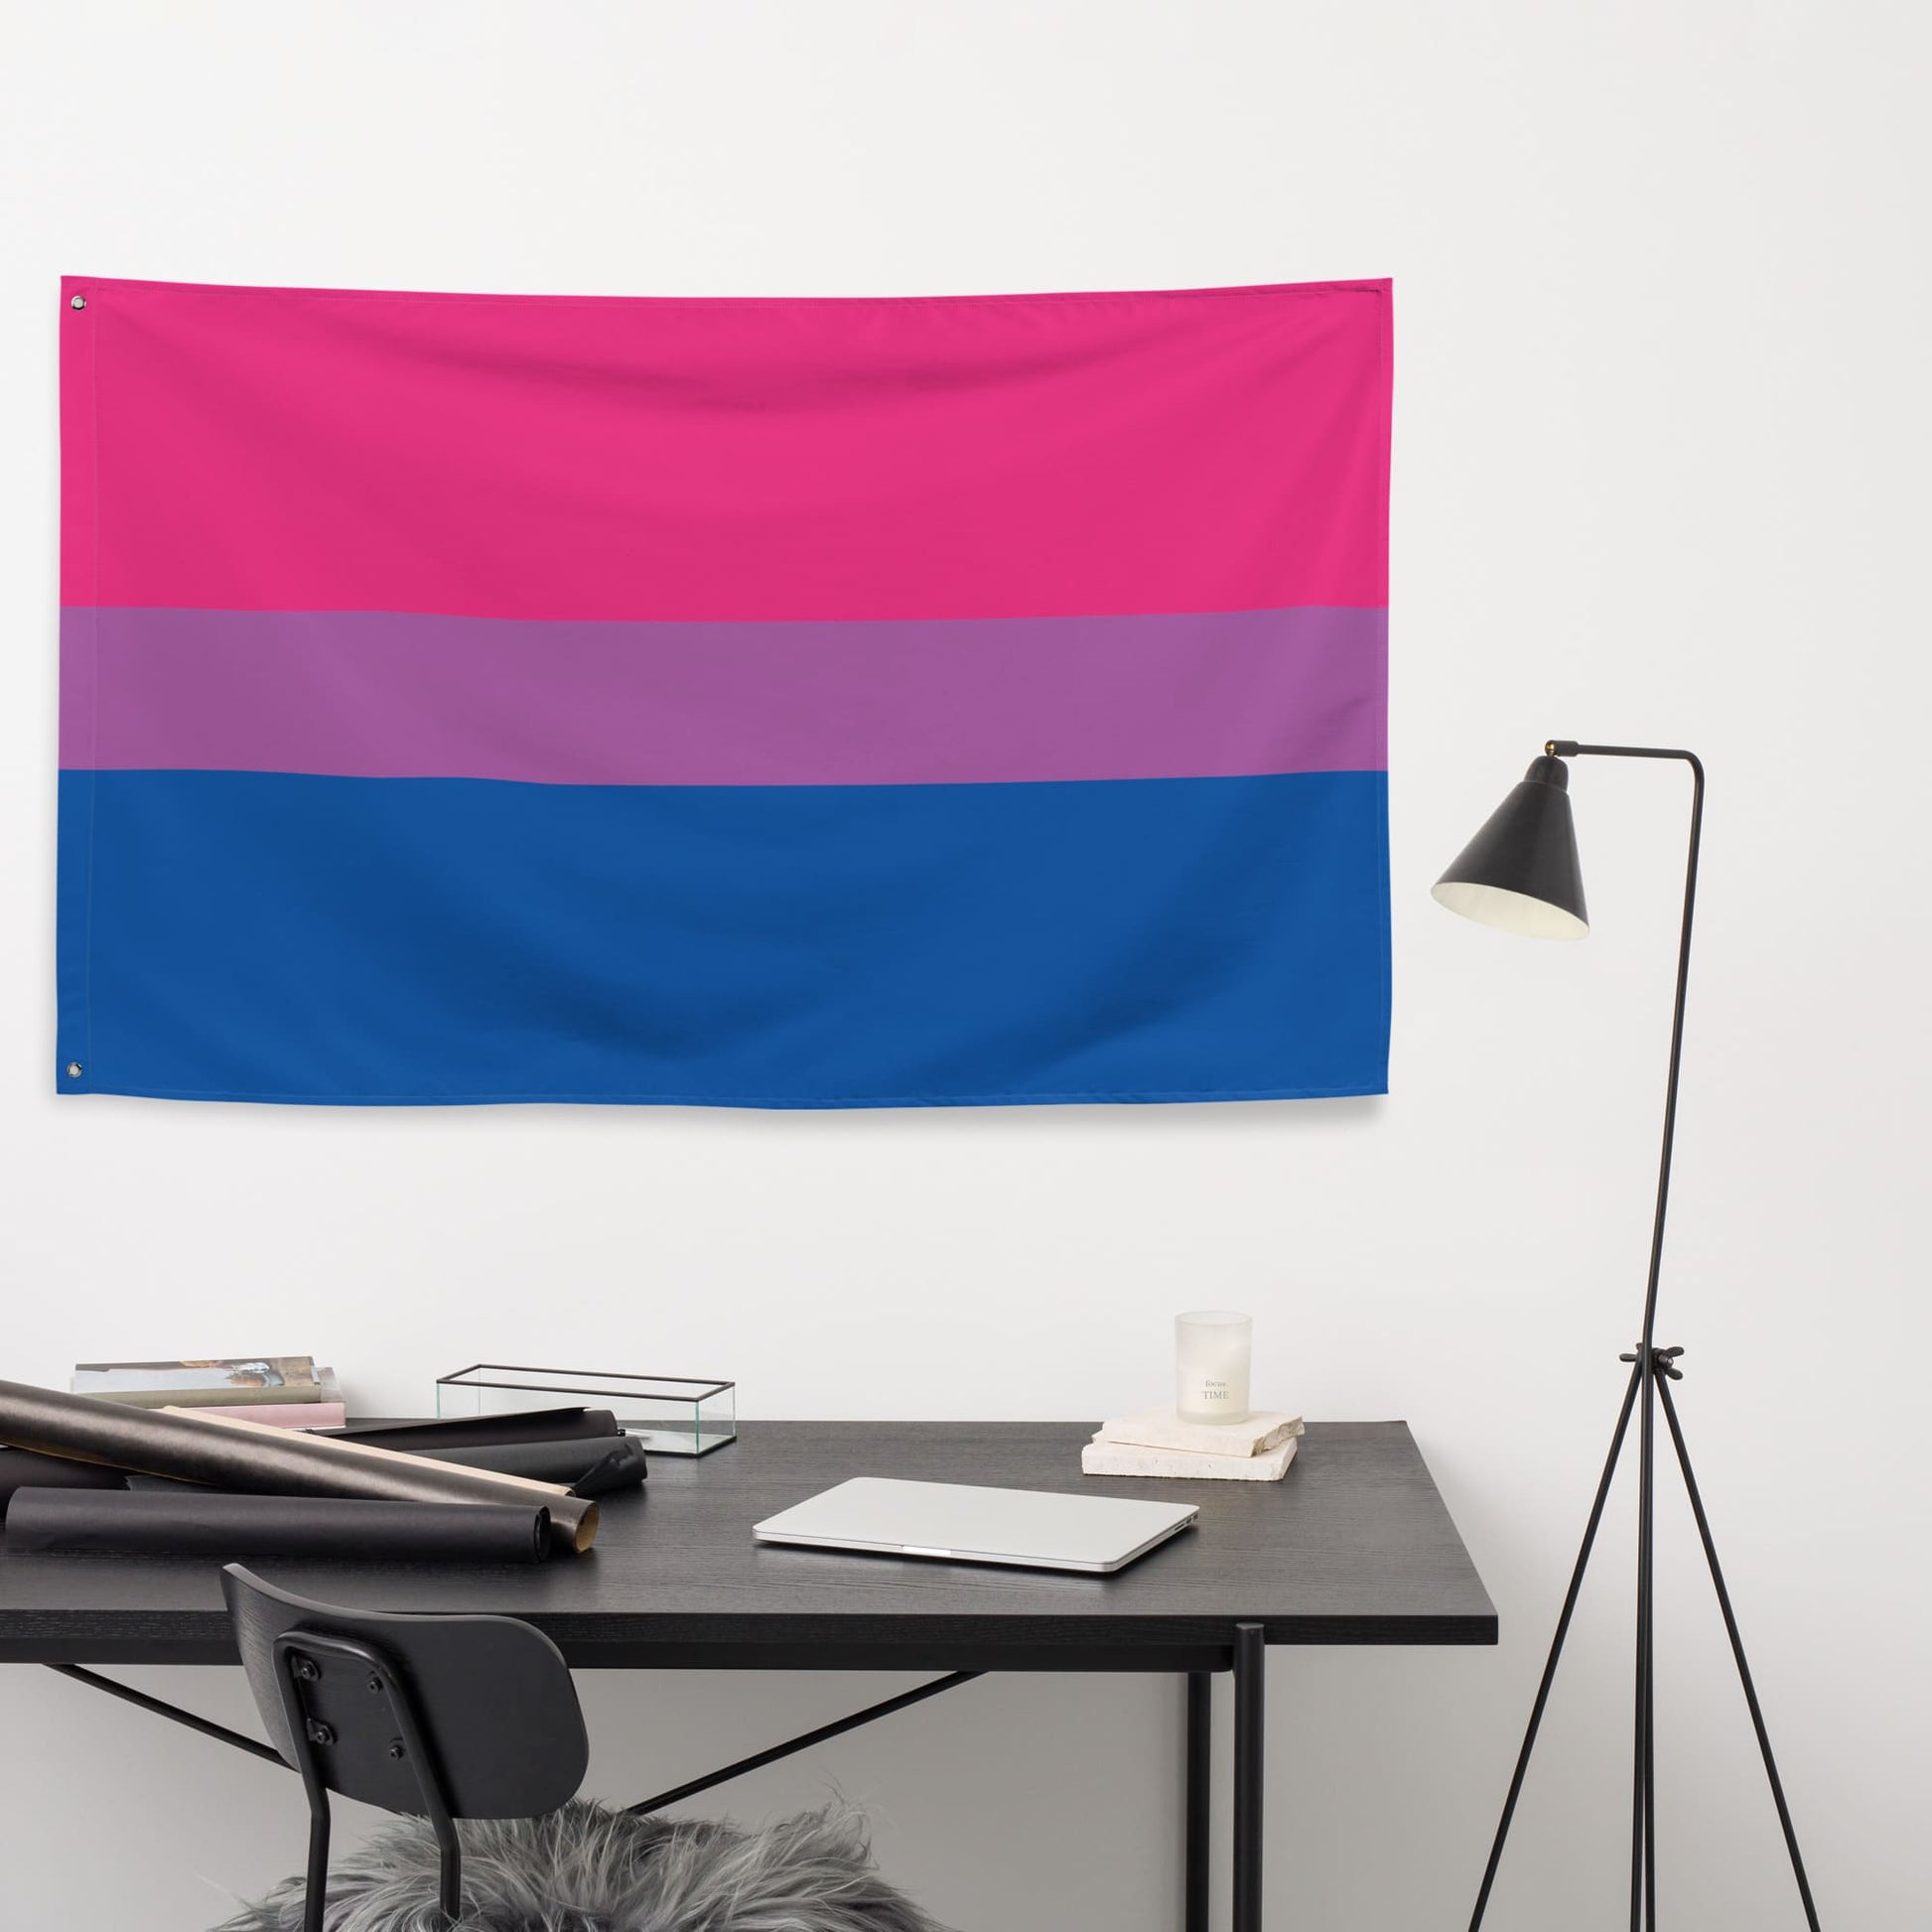 Bisexual flag wall tapestry, in use